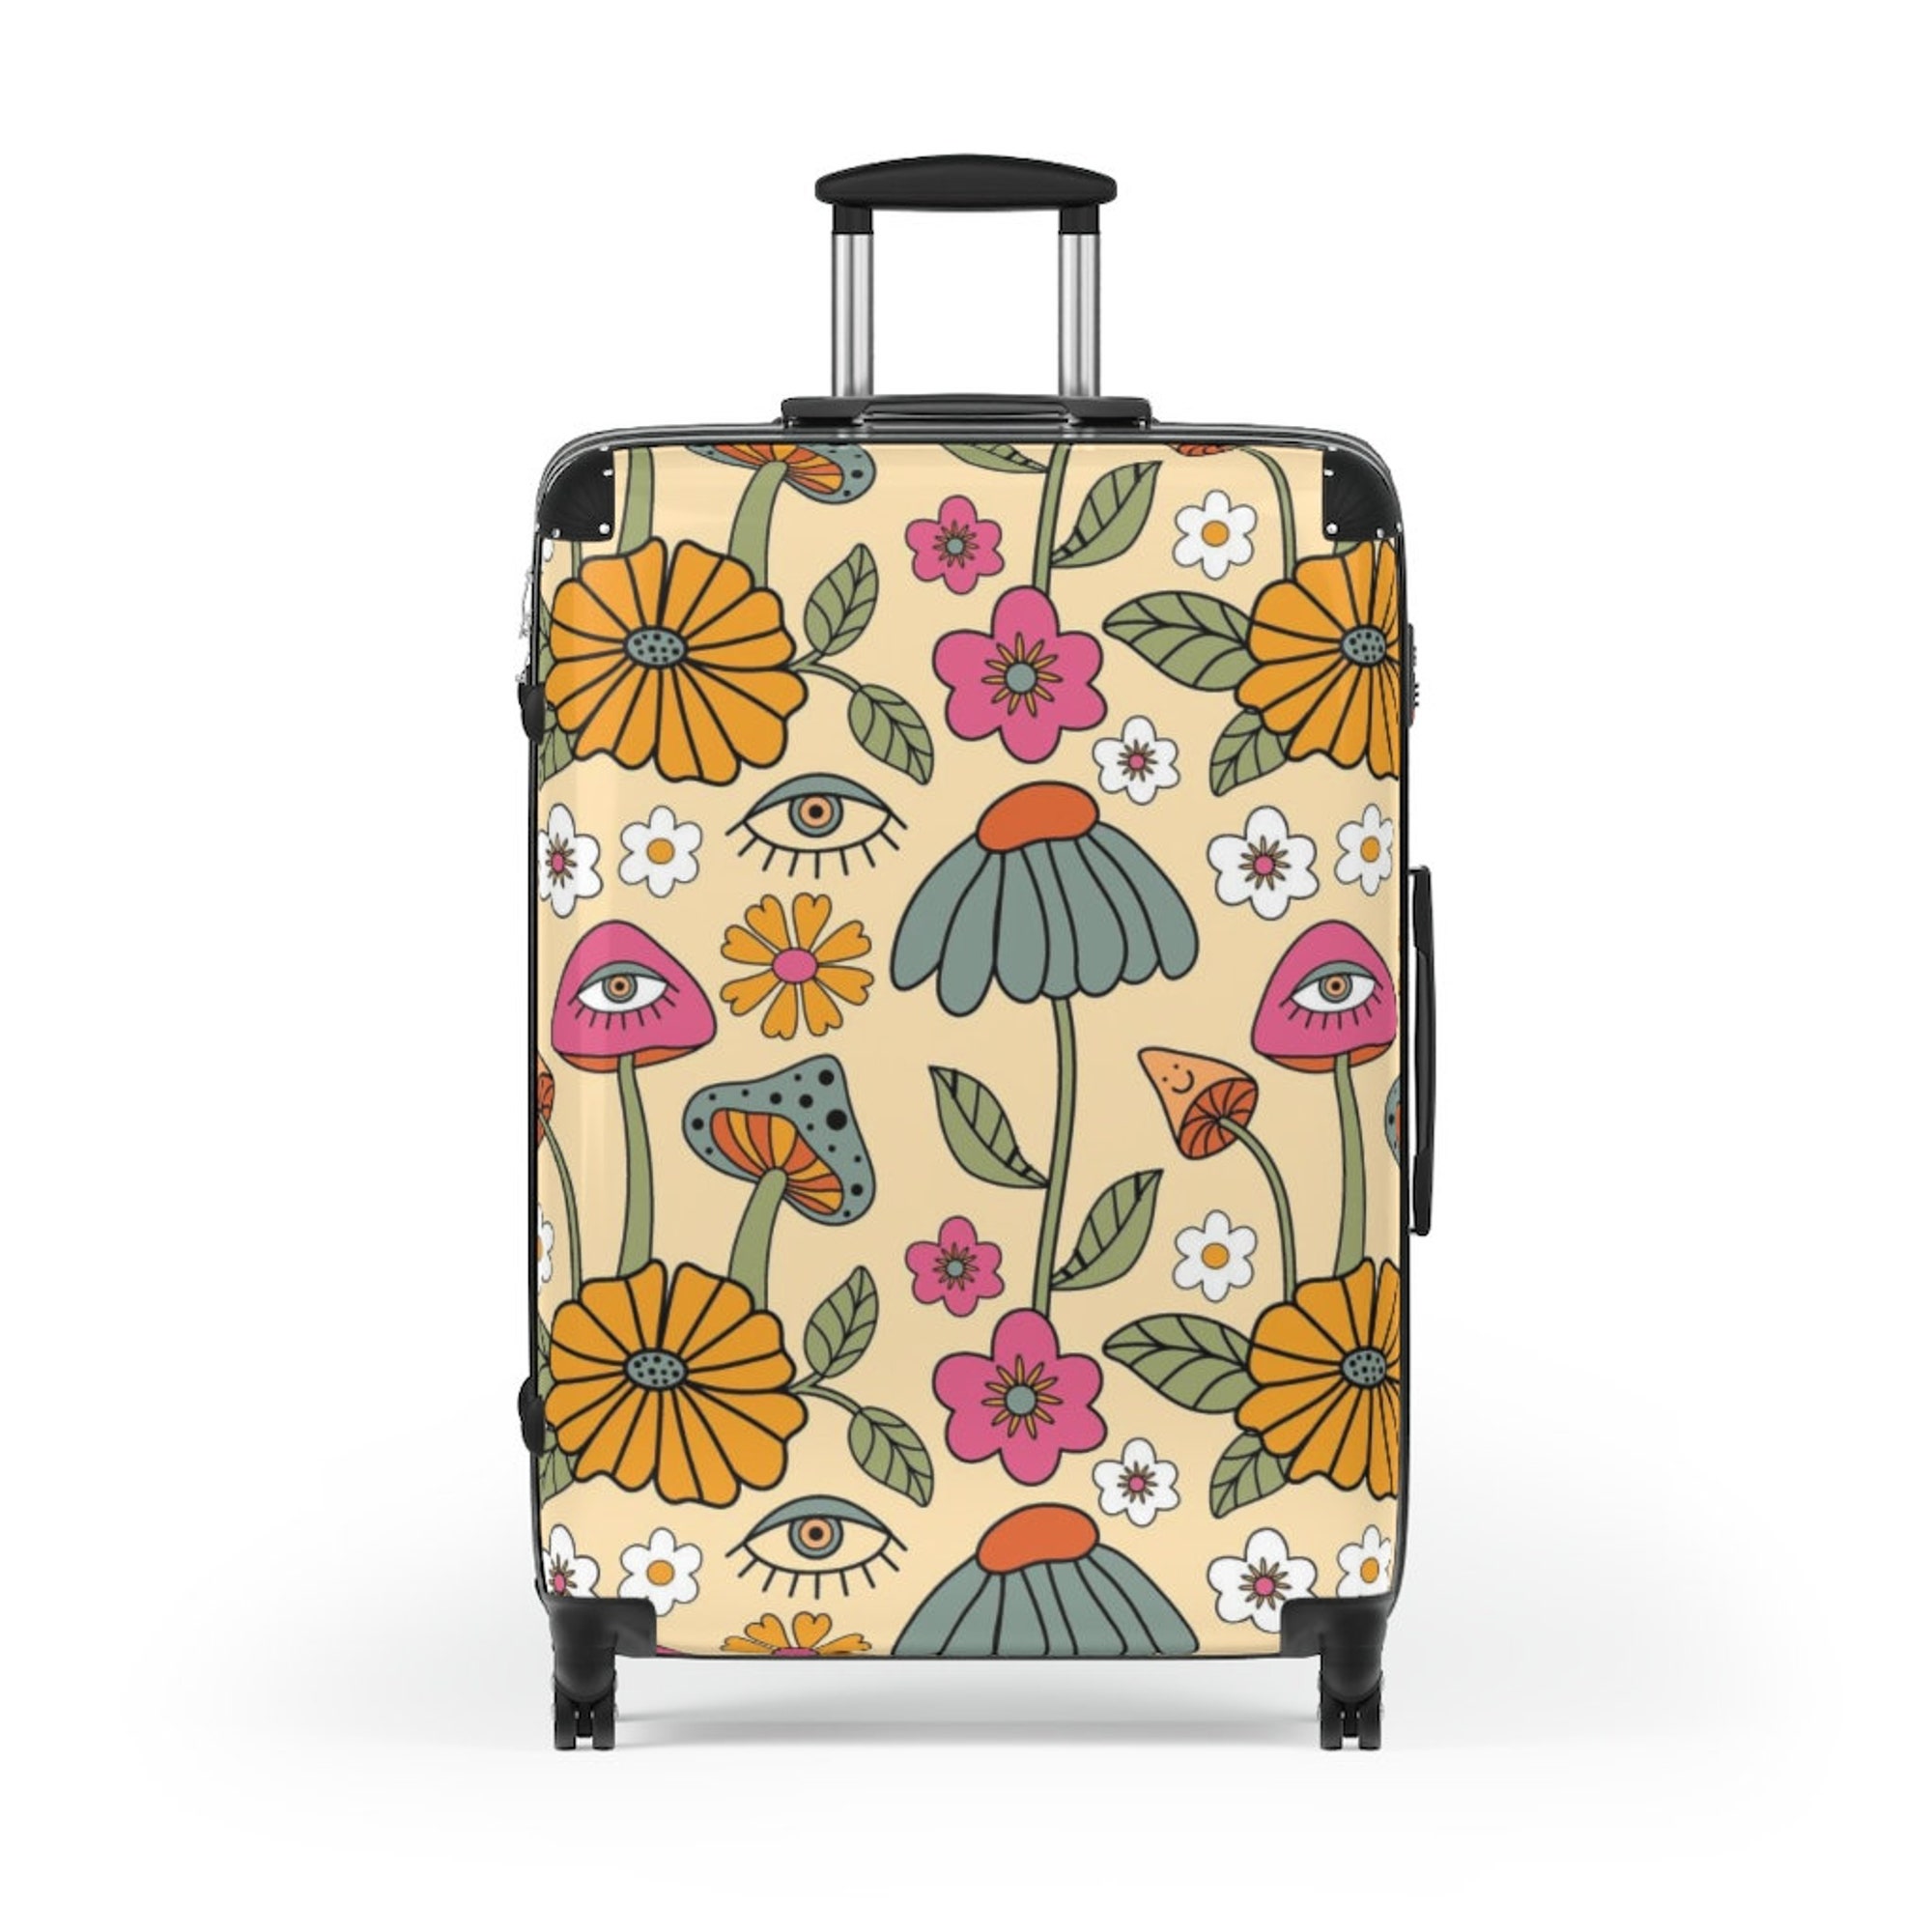 Discover Shrooms & Blooms Hippie Suitcase